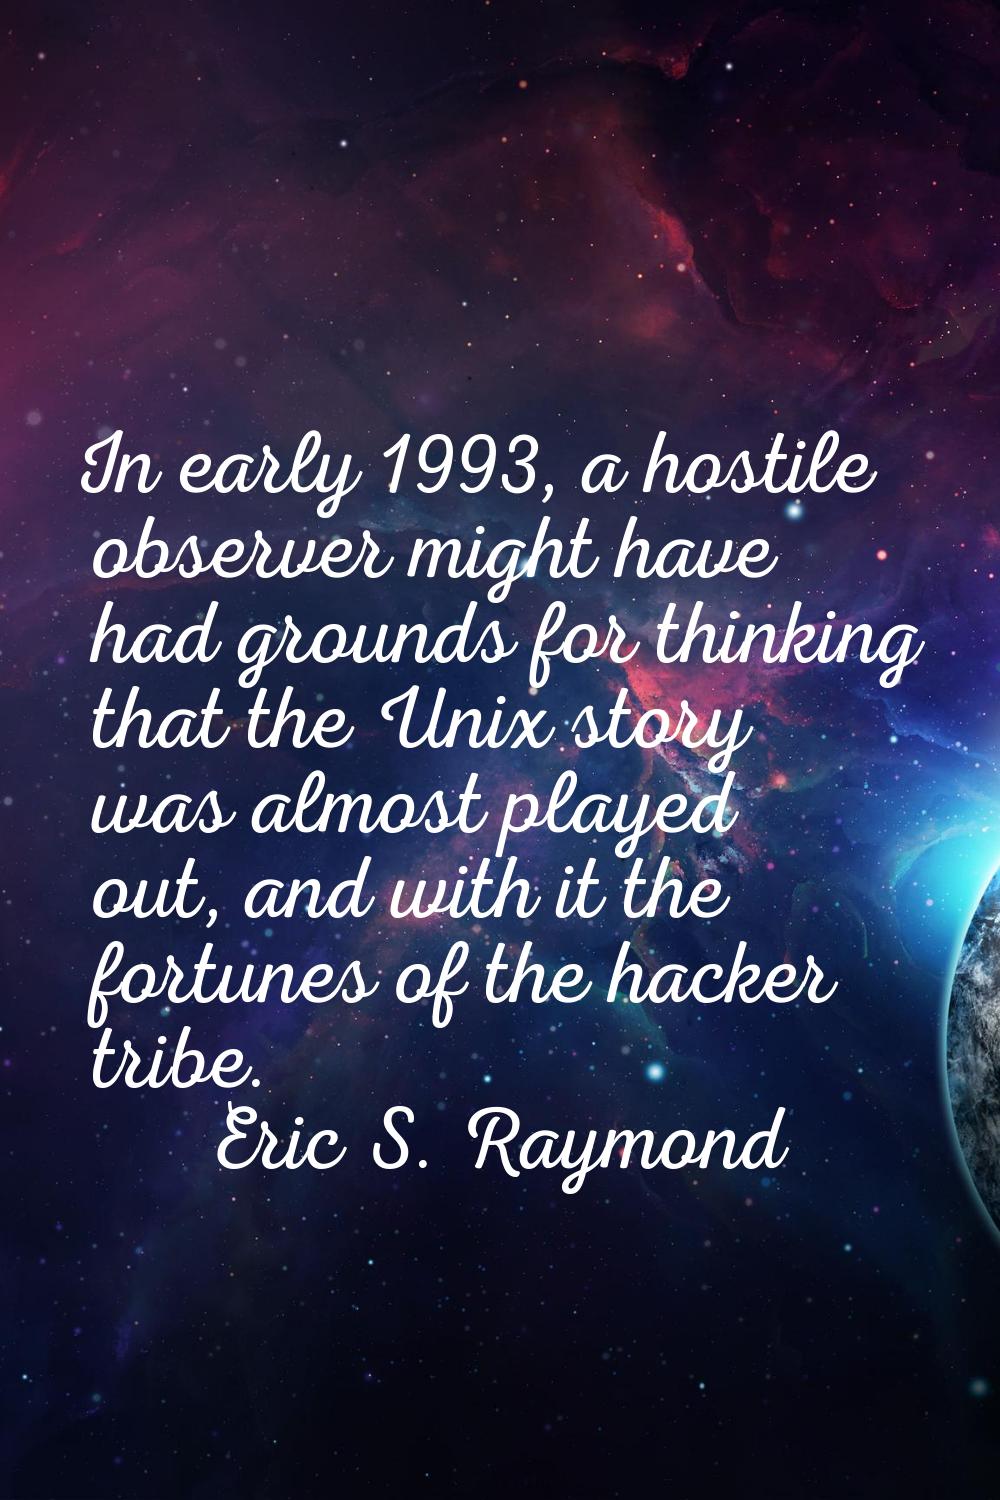 In early 1993, a hostile observer might have had grounds for thinking that the Unix story was almos